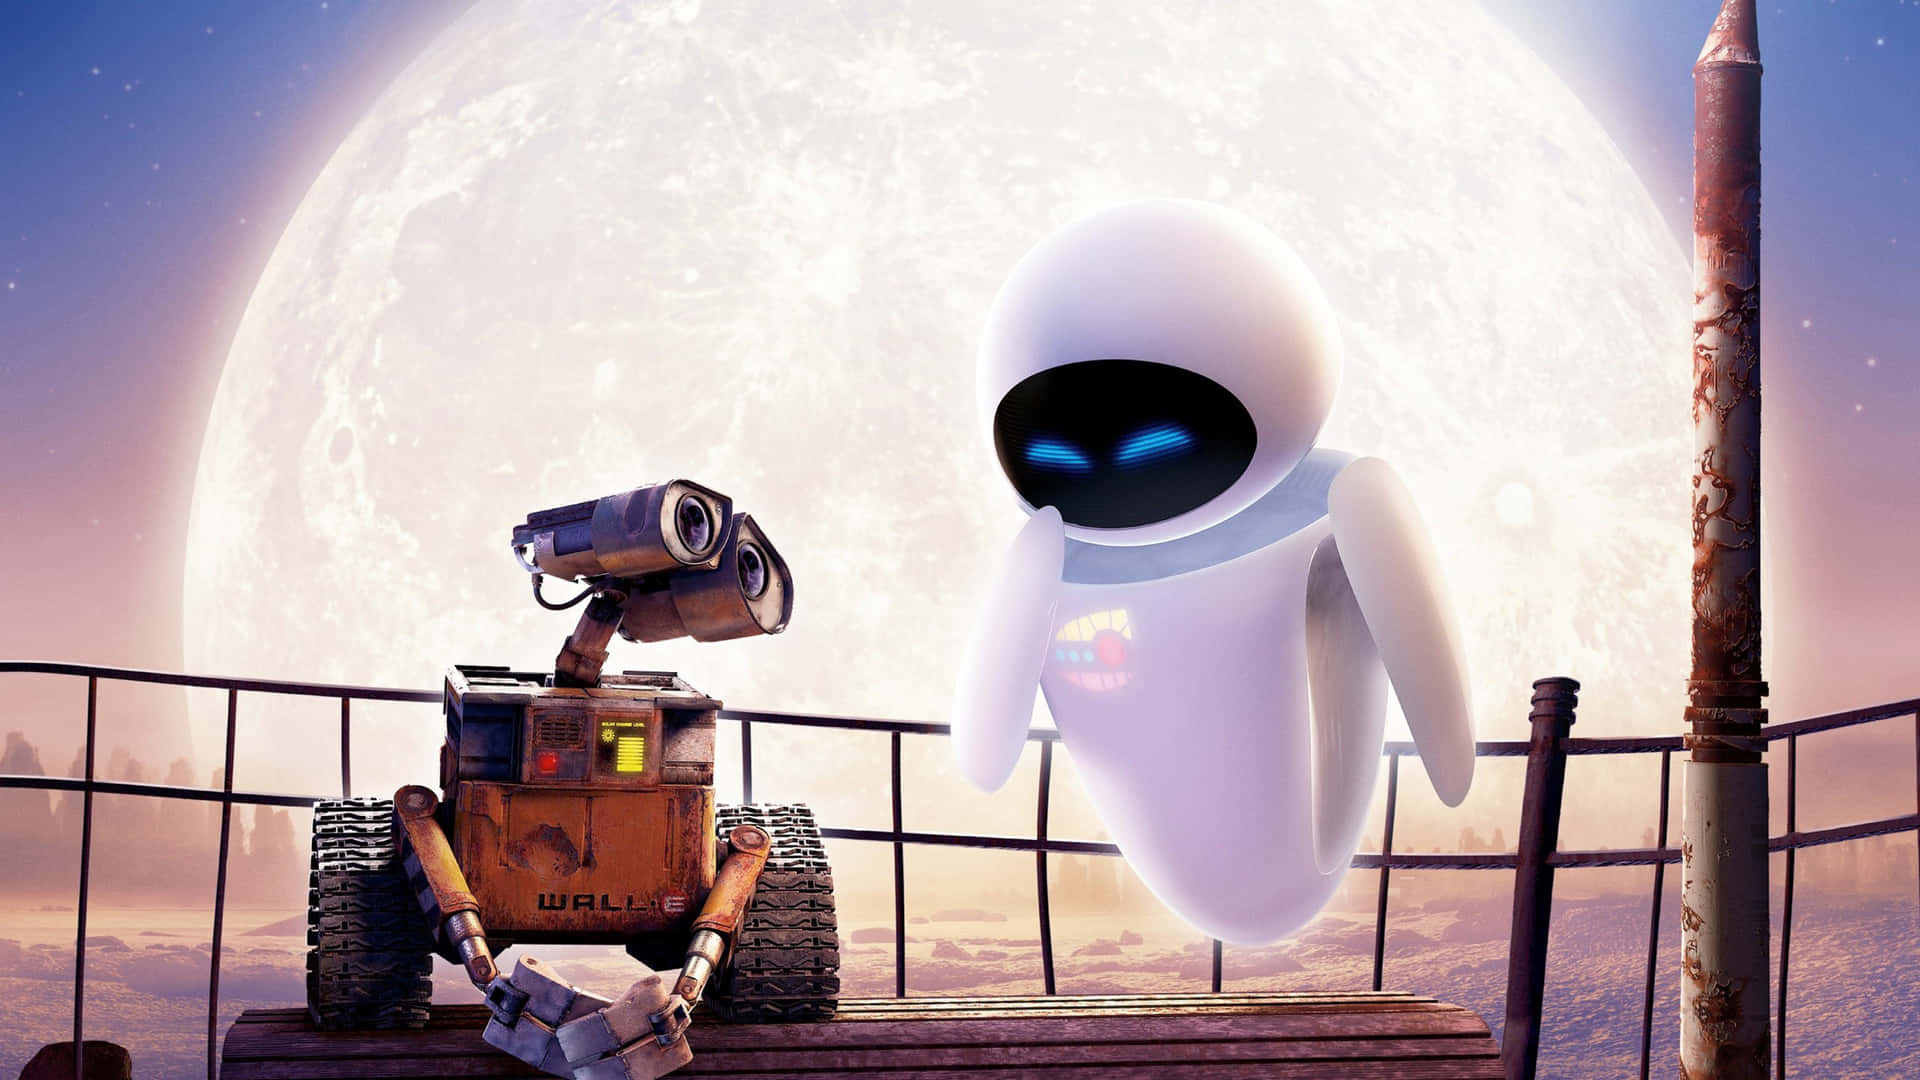 Eve And Wall E 1440p Disney Background